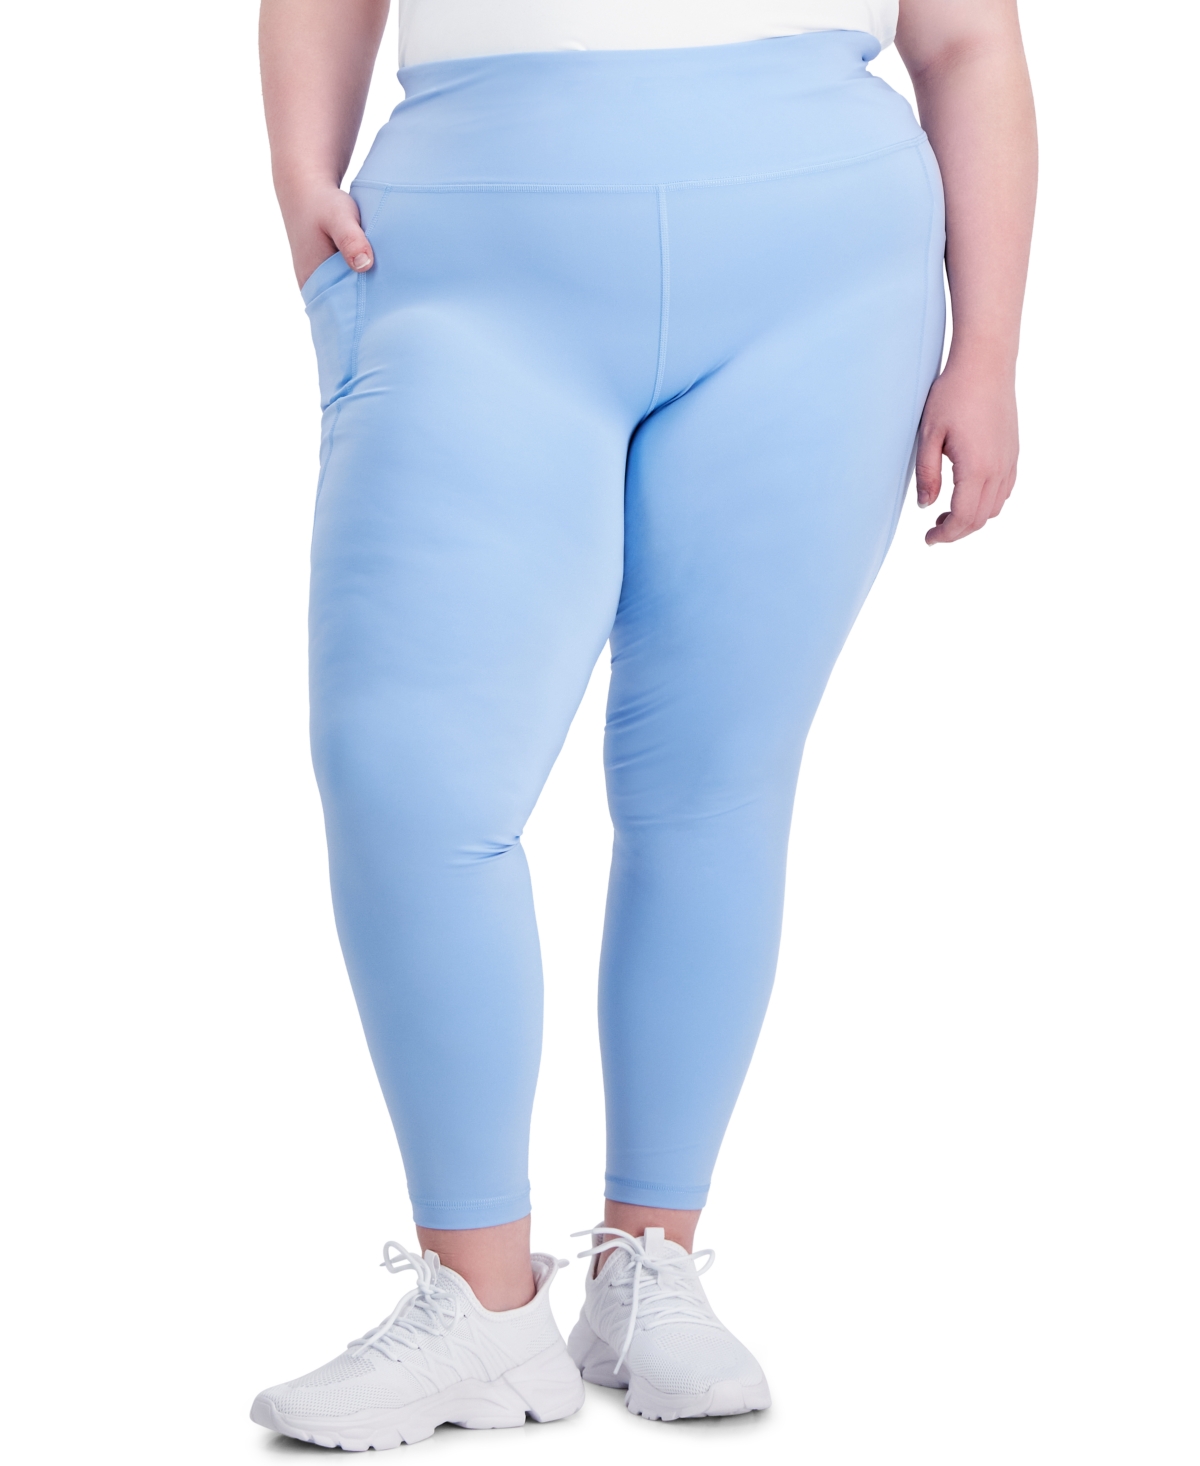 Plus Size Compression 7/8 Leggings, Created for Macy's - Skysail Blue